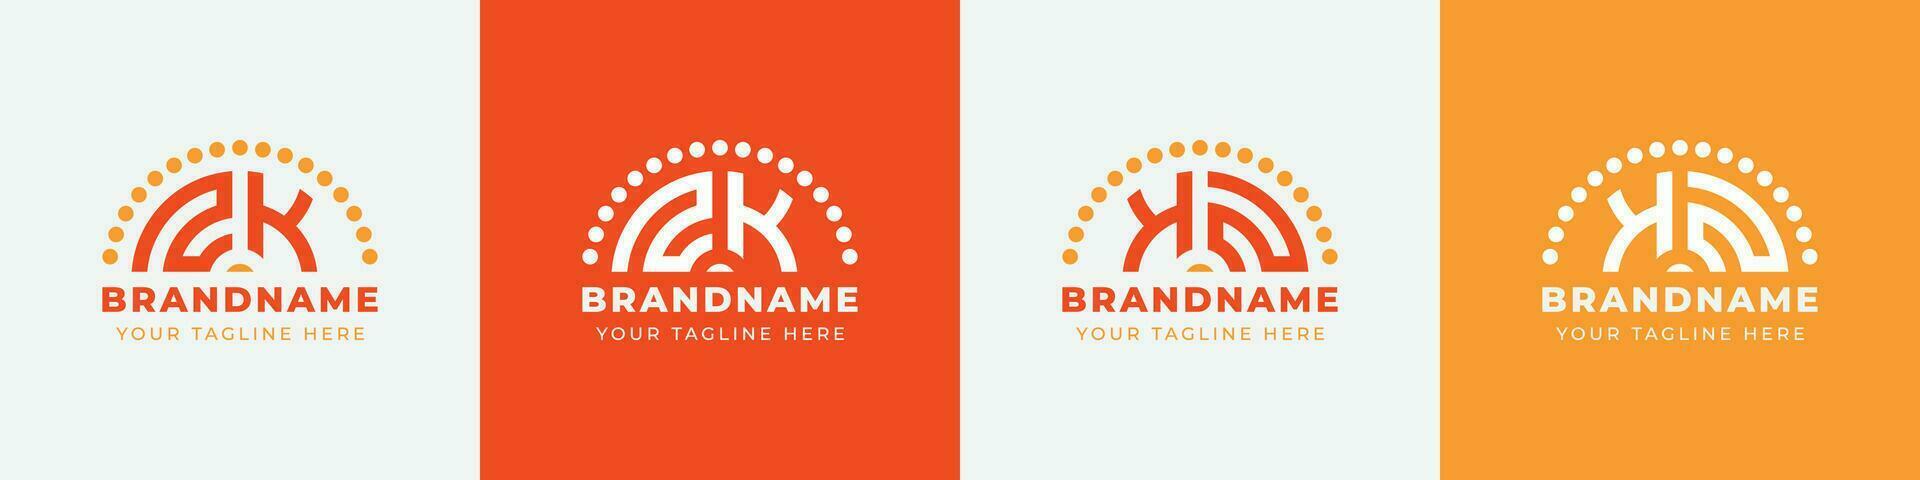 Letter KN and NK or KZ and ZK Sunrise  Logo Set, suitable for any business with KN, NK, KZ, ZK initials. vector